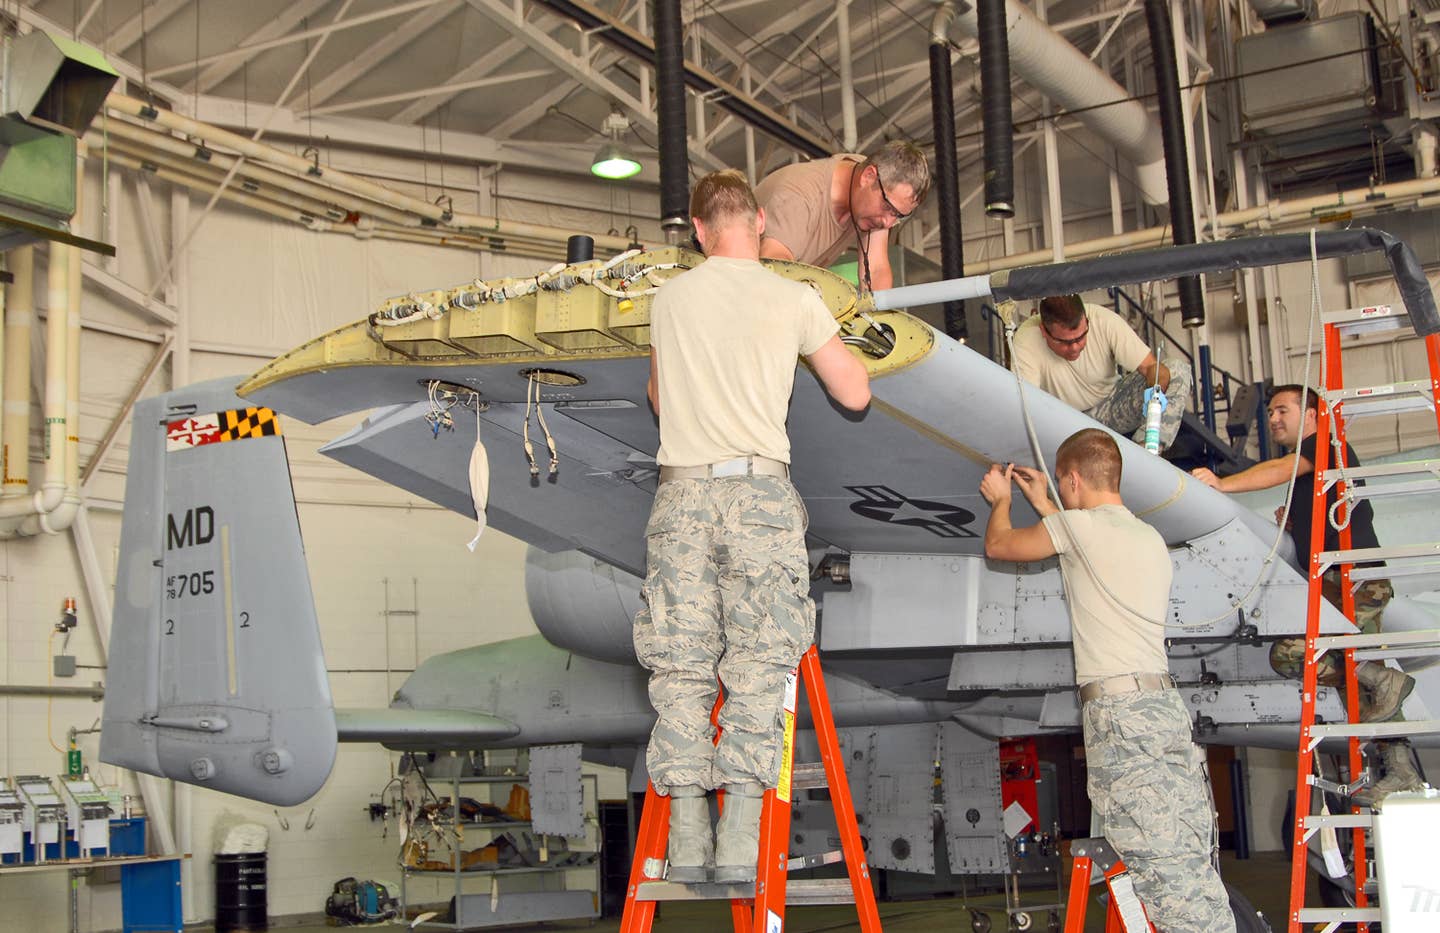 A team of Idaho Air National Guard maintainers from the 124th Wing at Gowen Field in Boise, Idaho reinstall the leading edges on the wing of a Maryland Air National Guard A-10 Thunderbolt II. (U.S. Air Force photo/Master Sgt. Thomas Gloeckle)